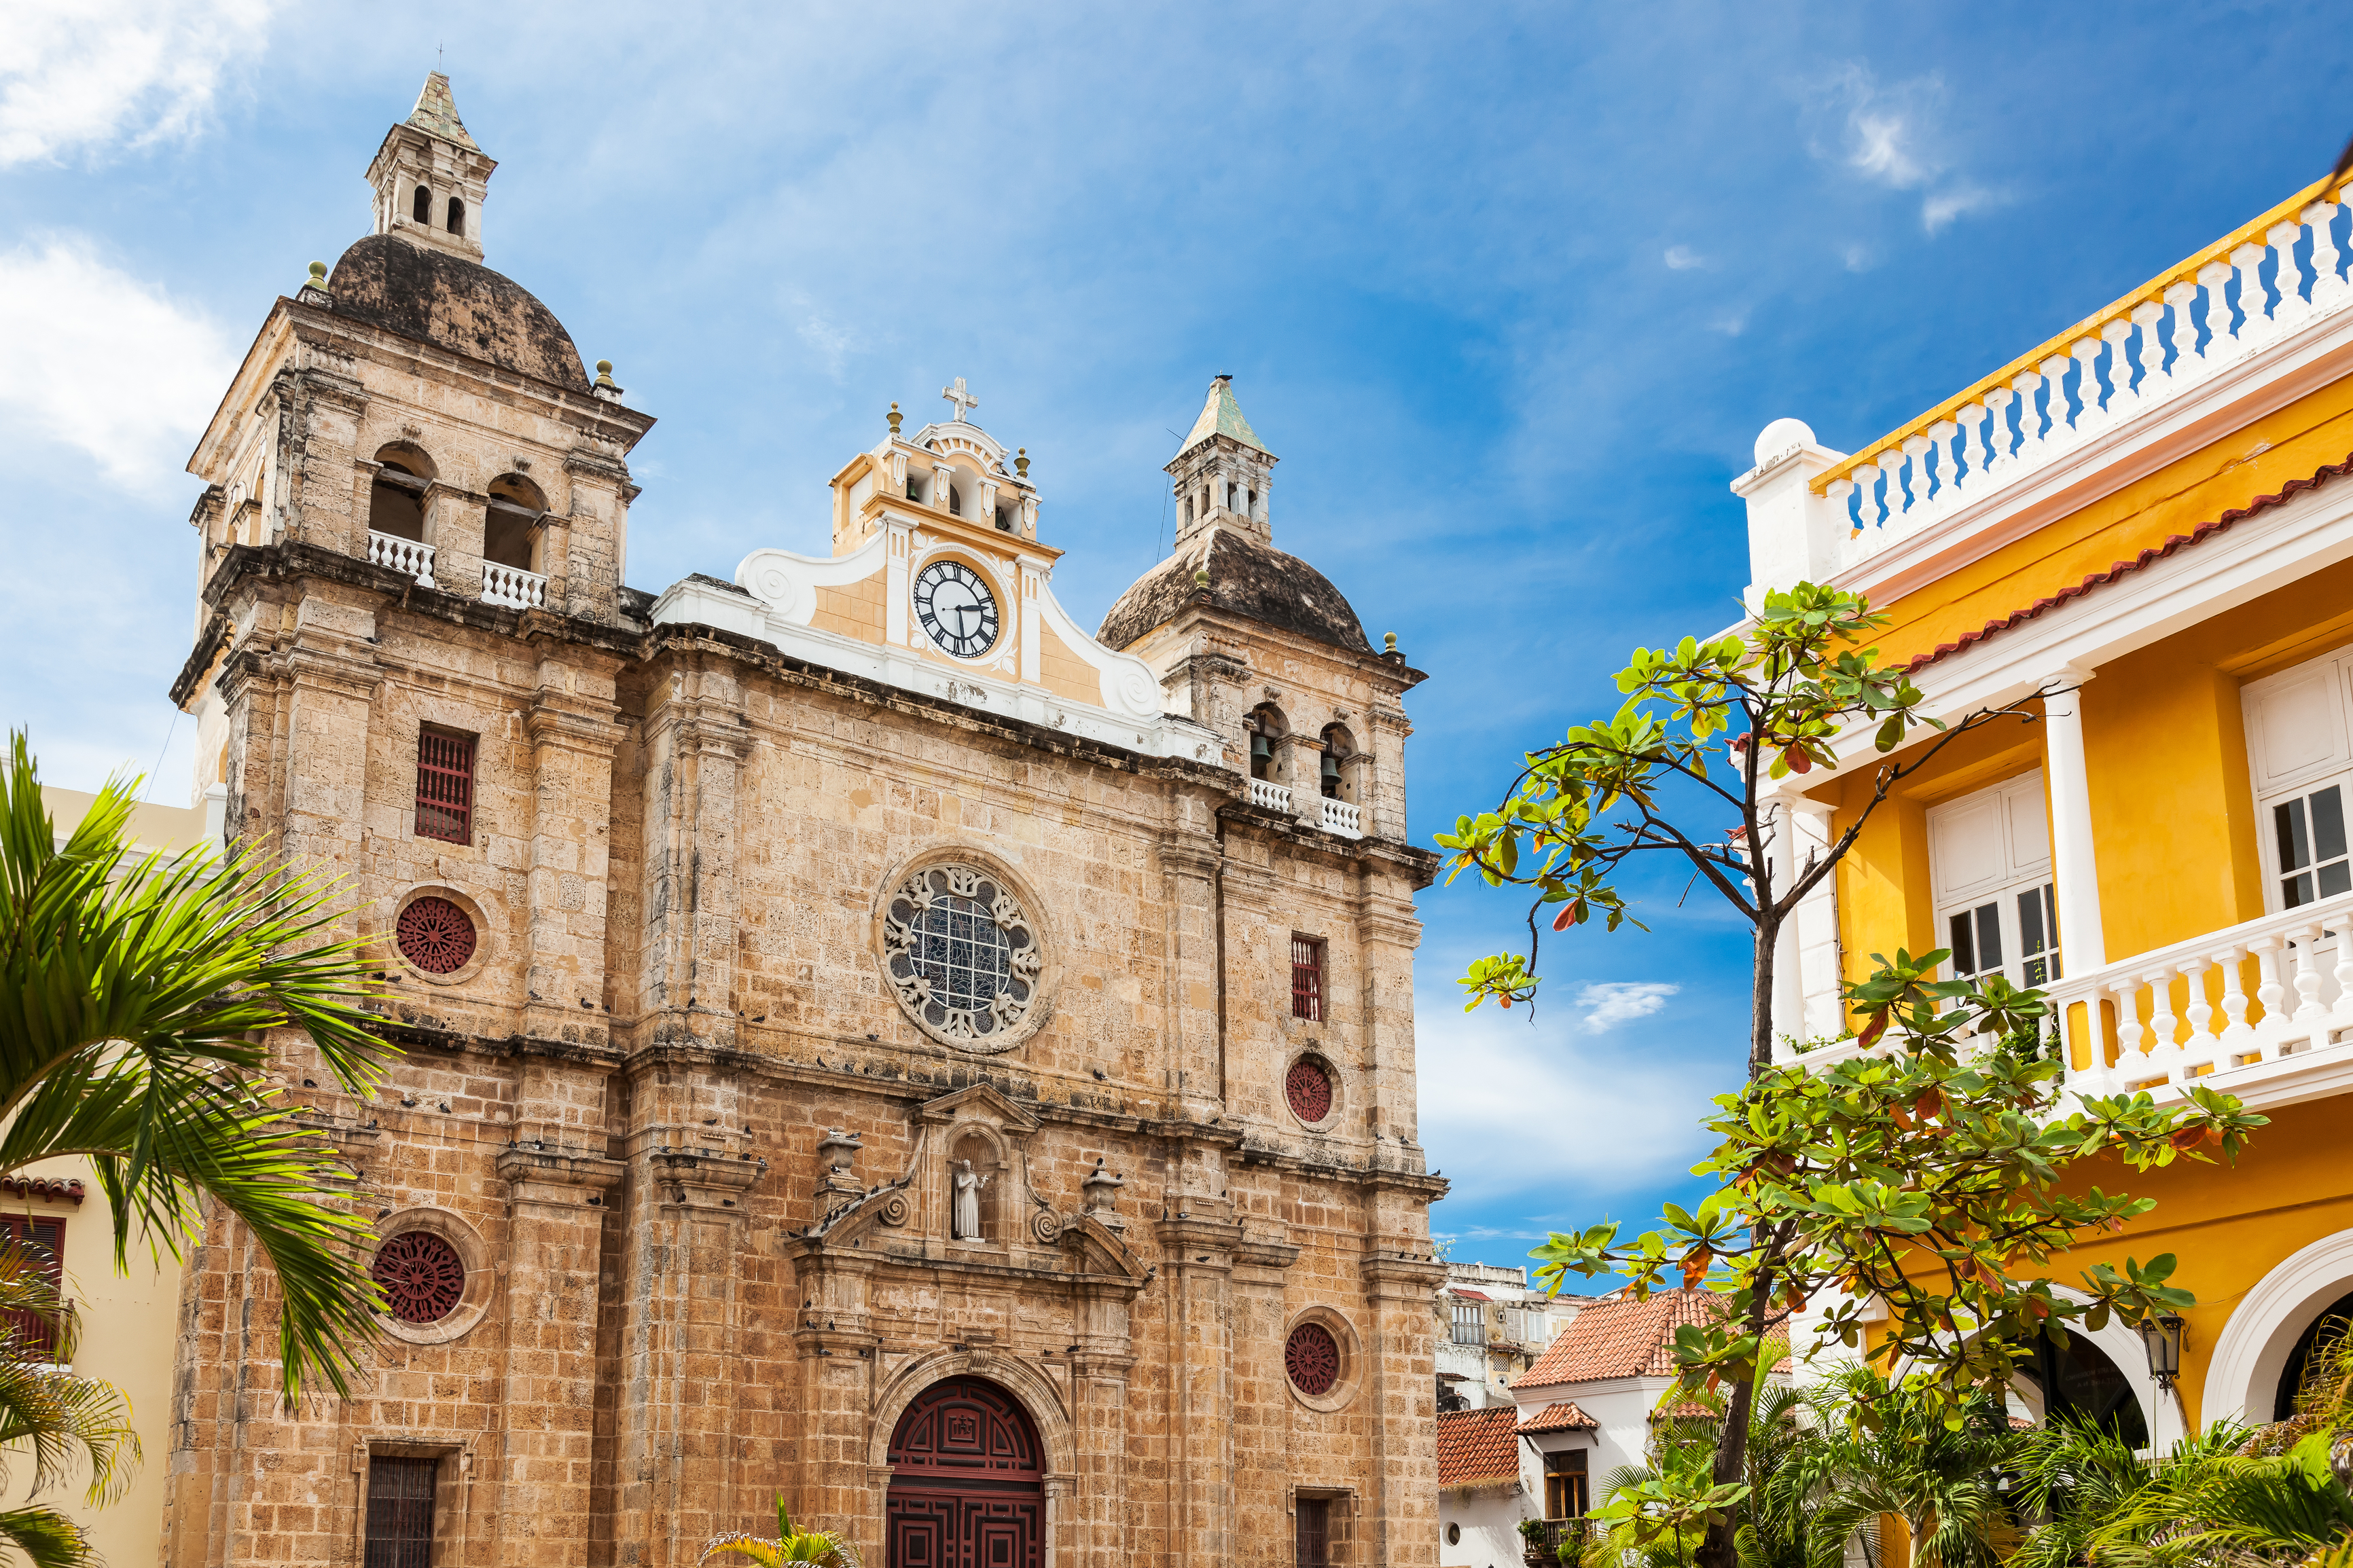 Flights to Cartagena, Colombia in the $200s and $300s round-trip